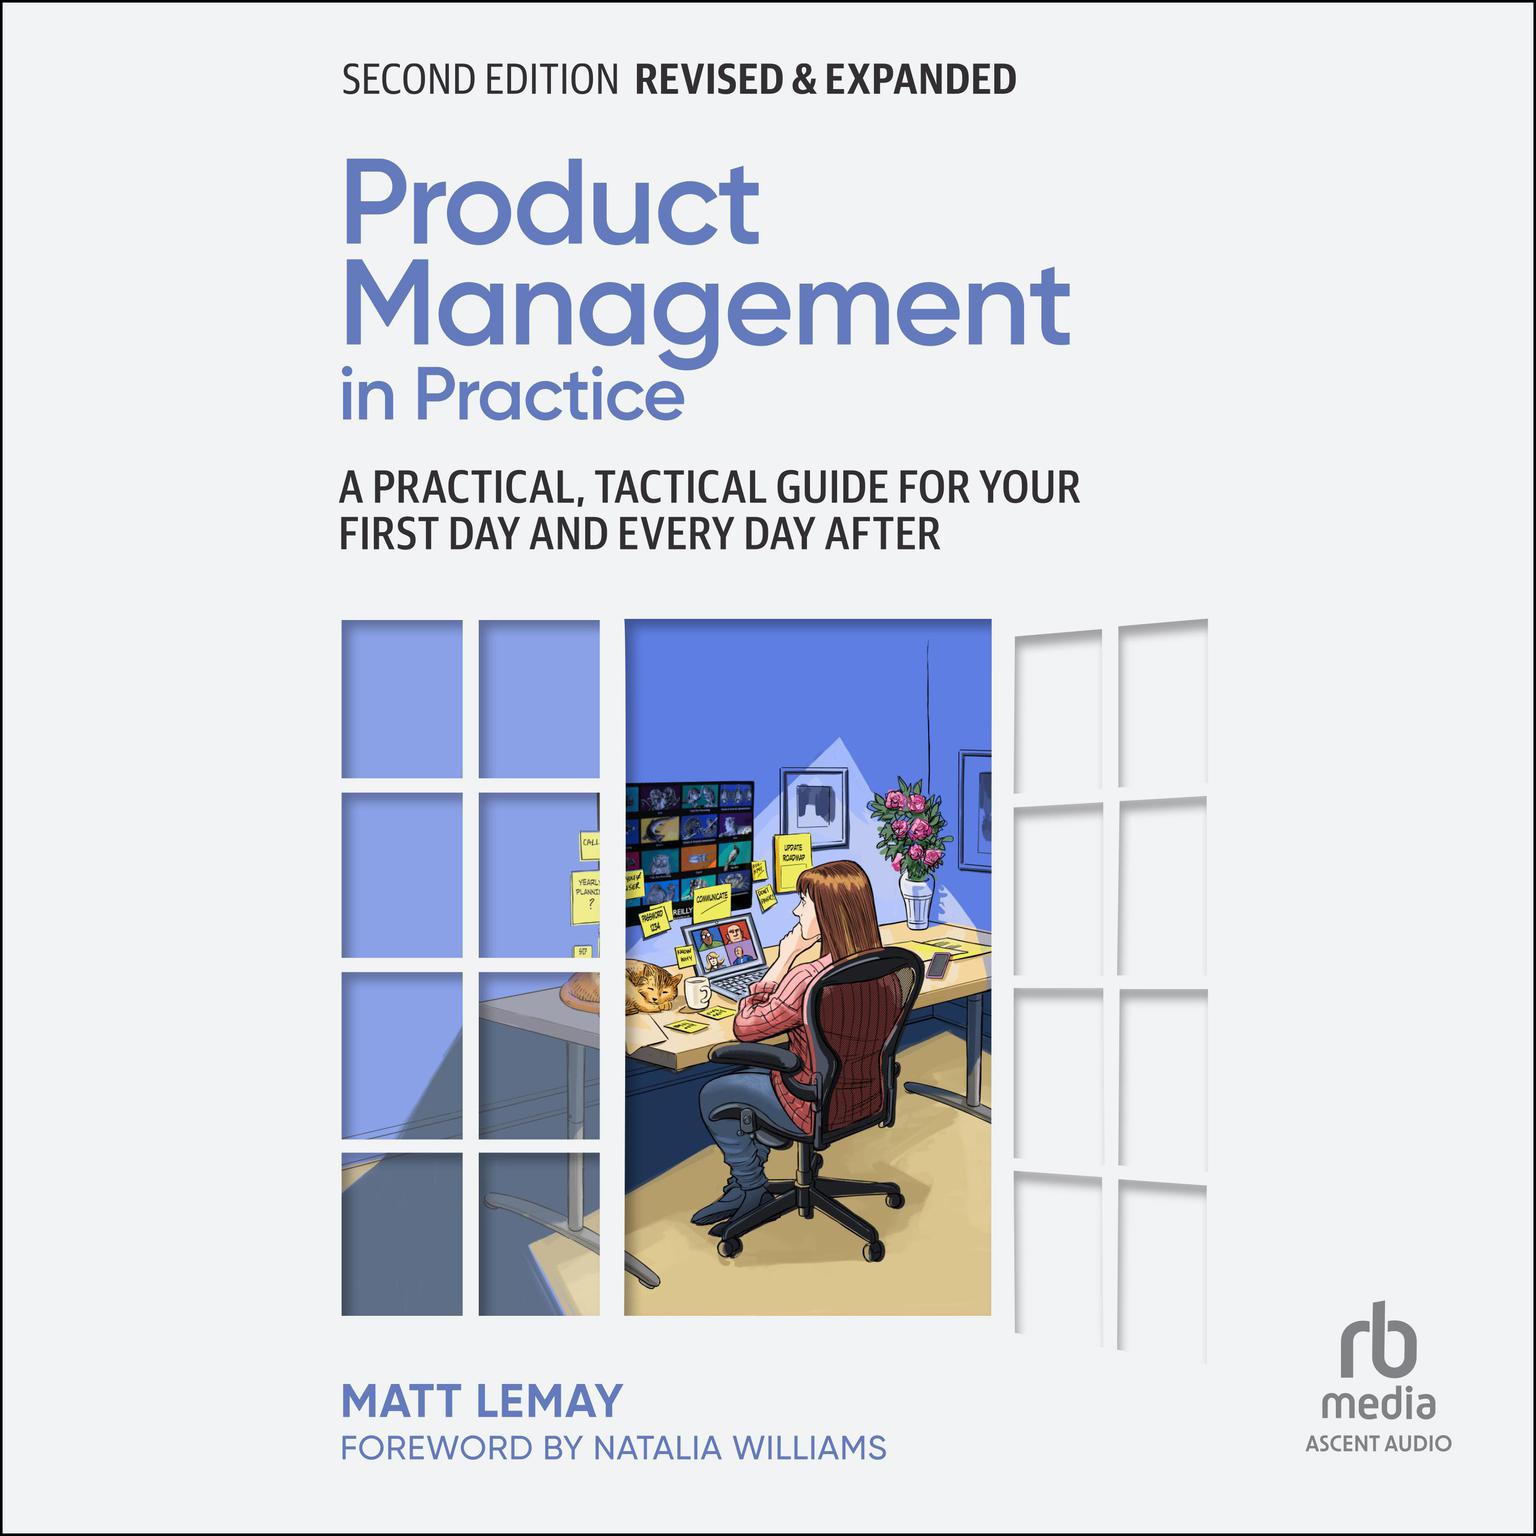 Product Management in Practice: A Practical, Tactical Guide for Your First Day and Every Day After, 2nd Edition Audiobook, by Matt LeMay